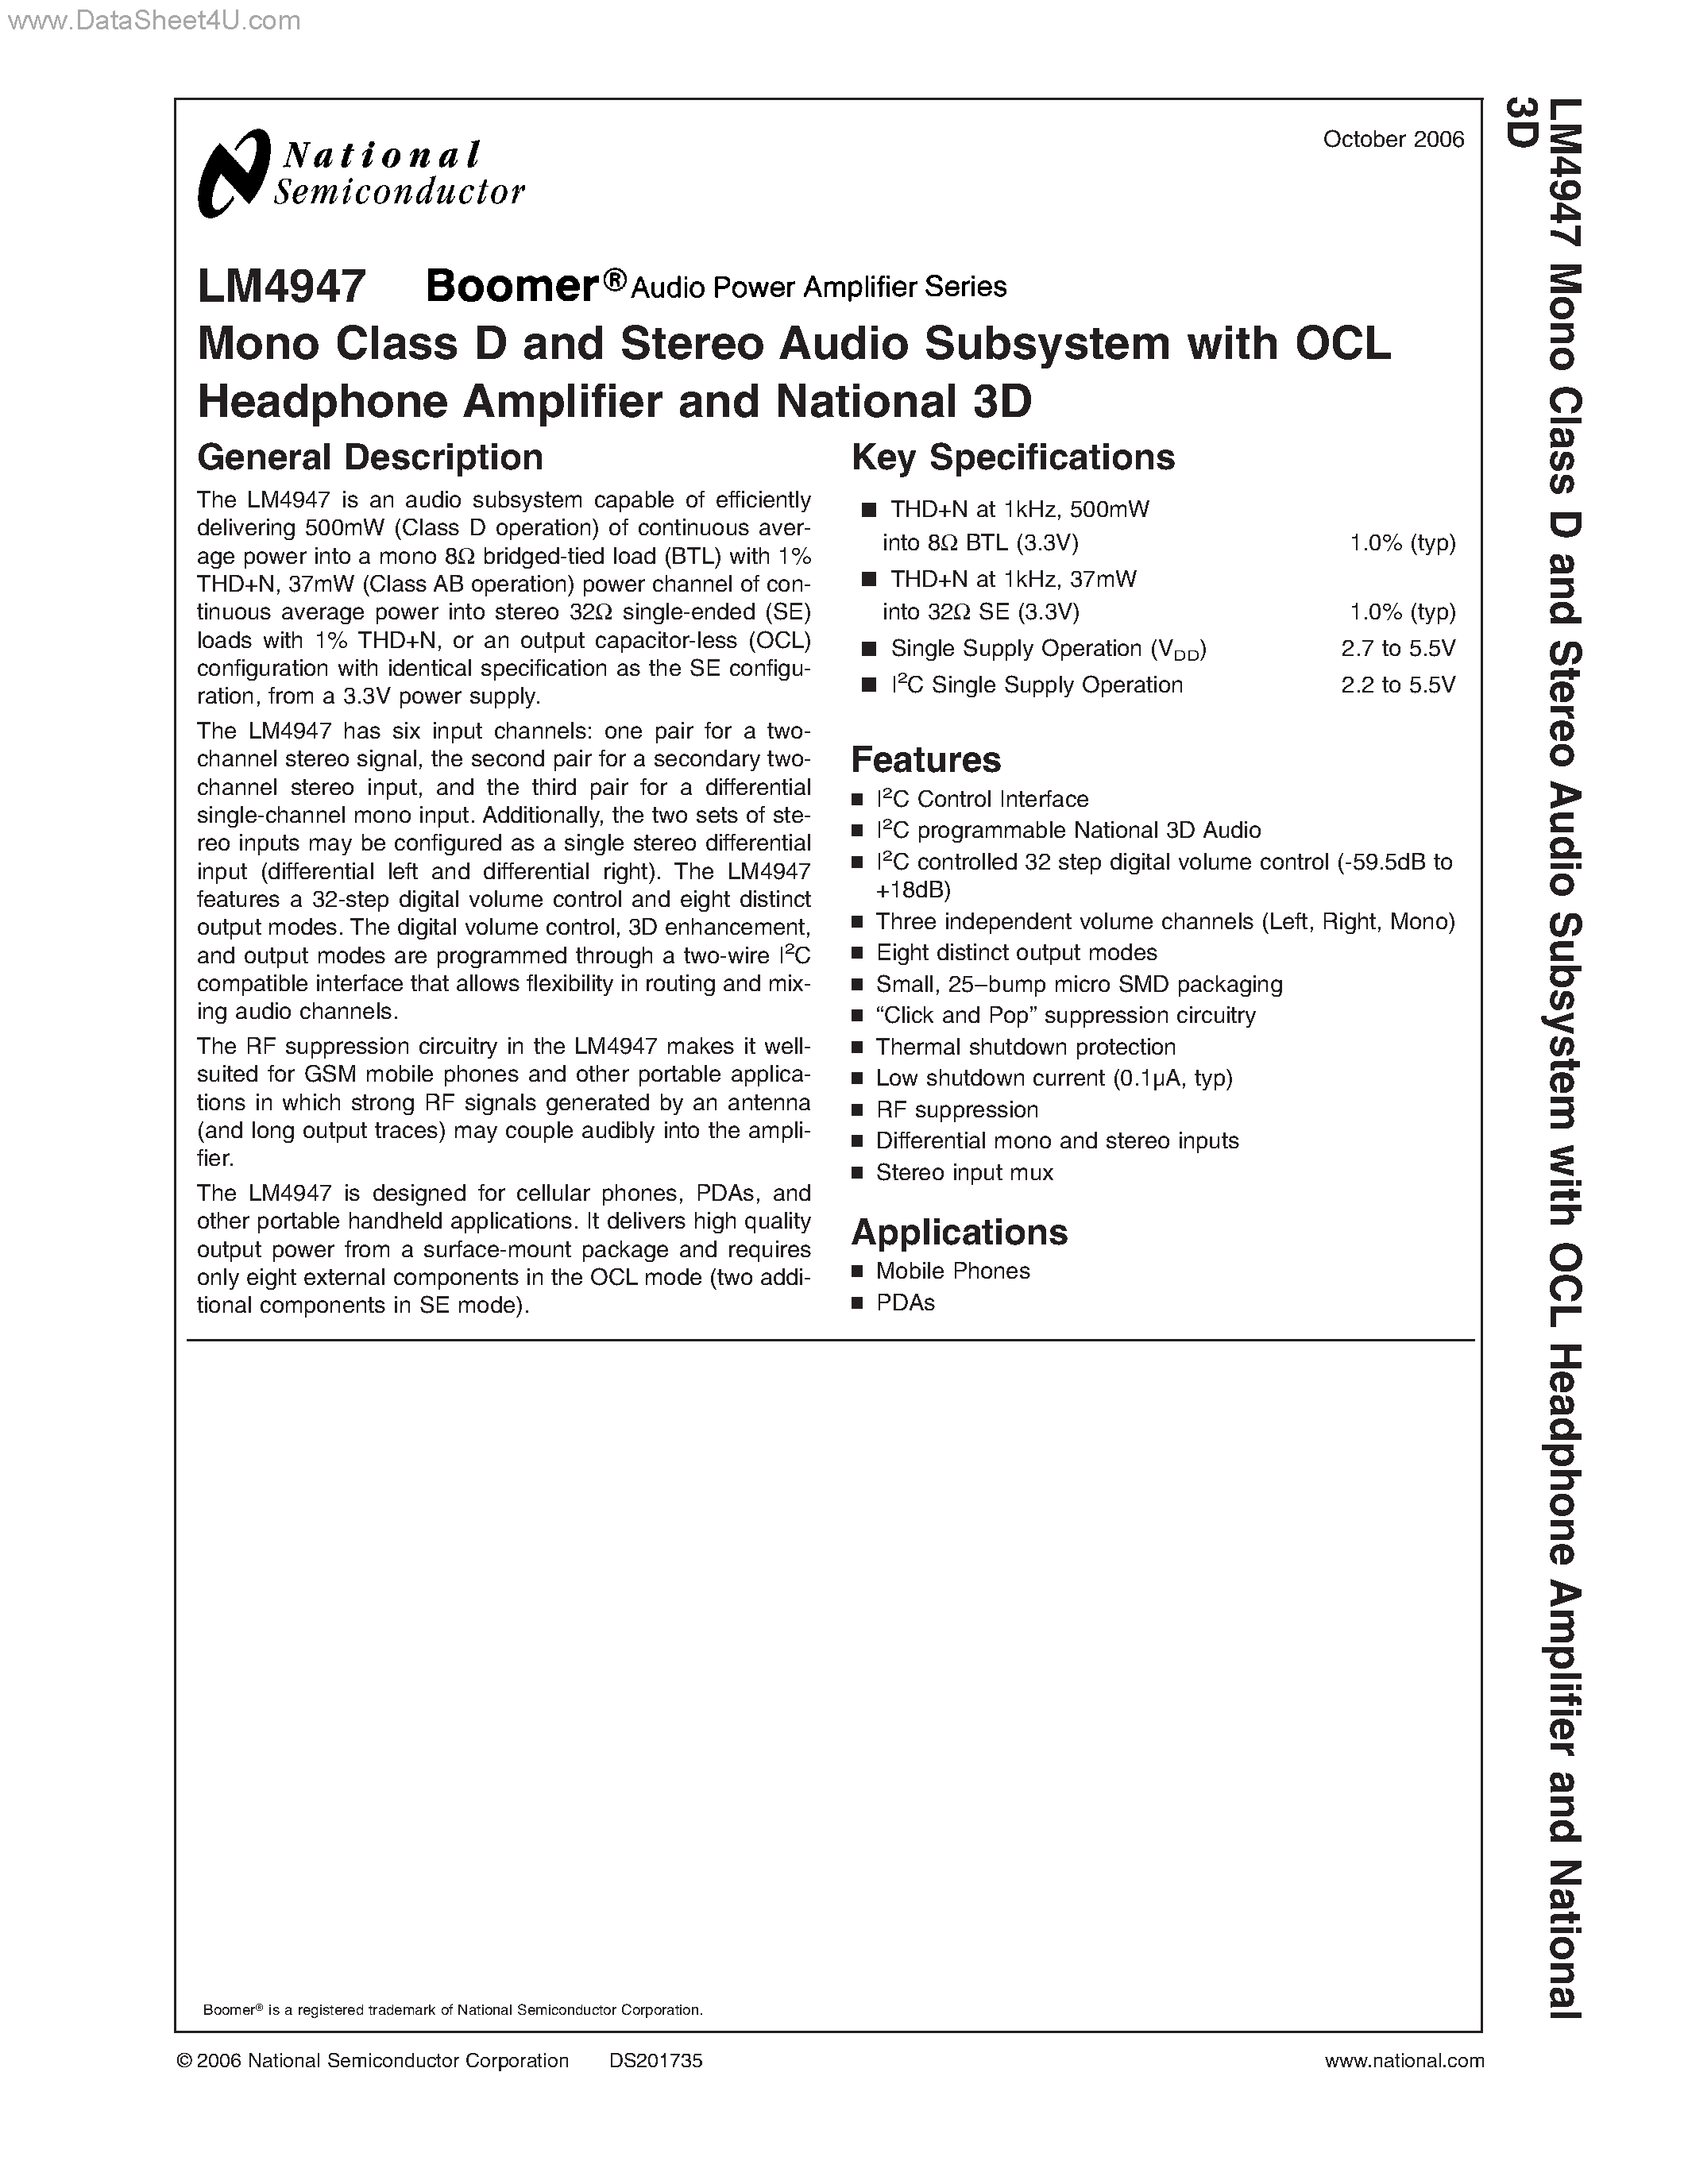 Даташит LM4947 - Mono Class D and Stereo Audio Subsystem страница 1